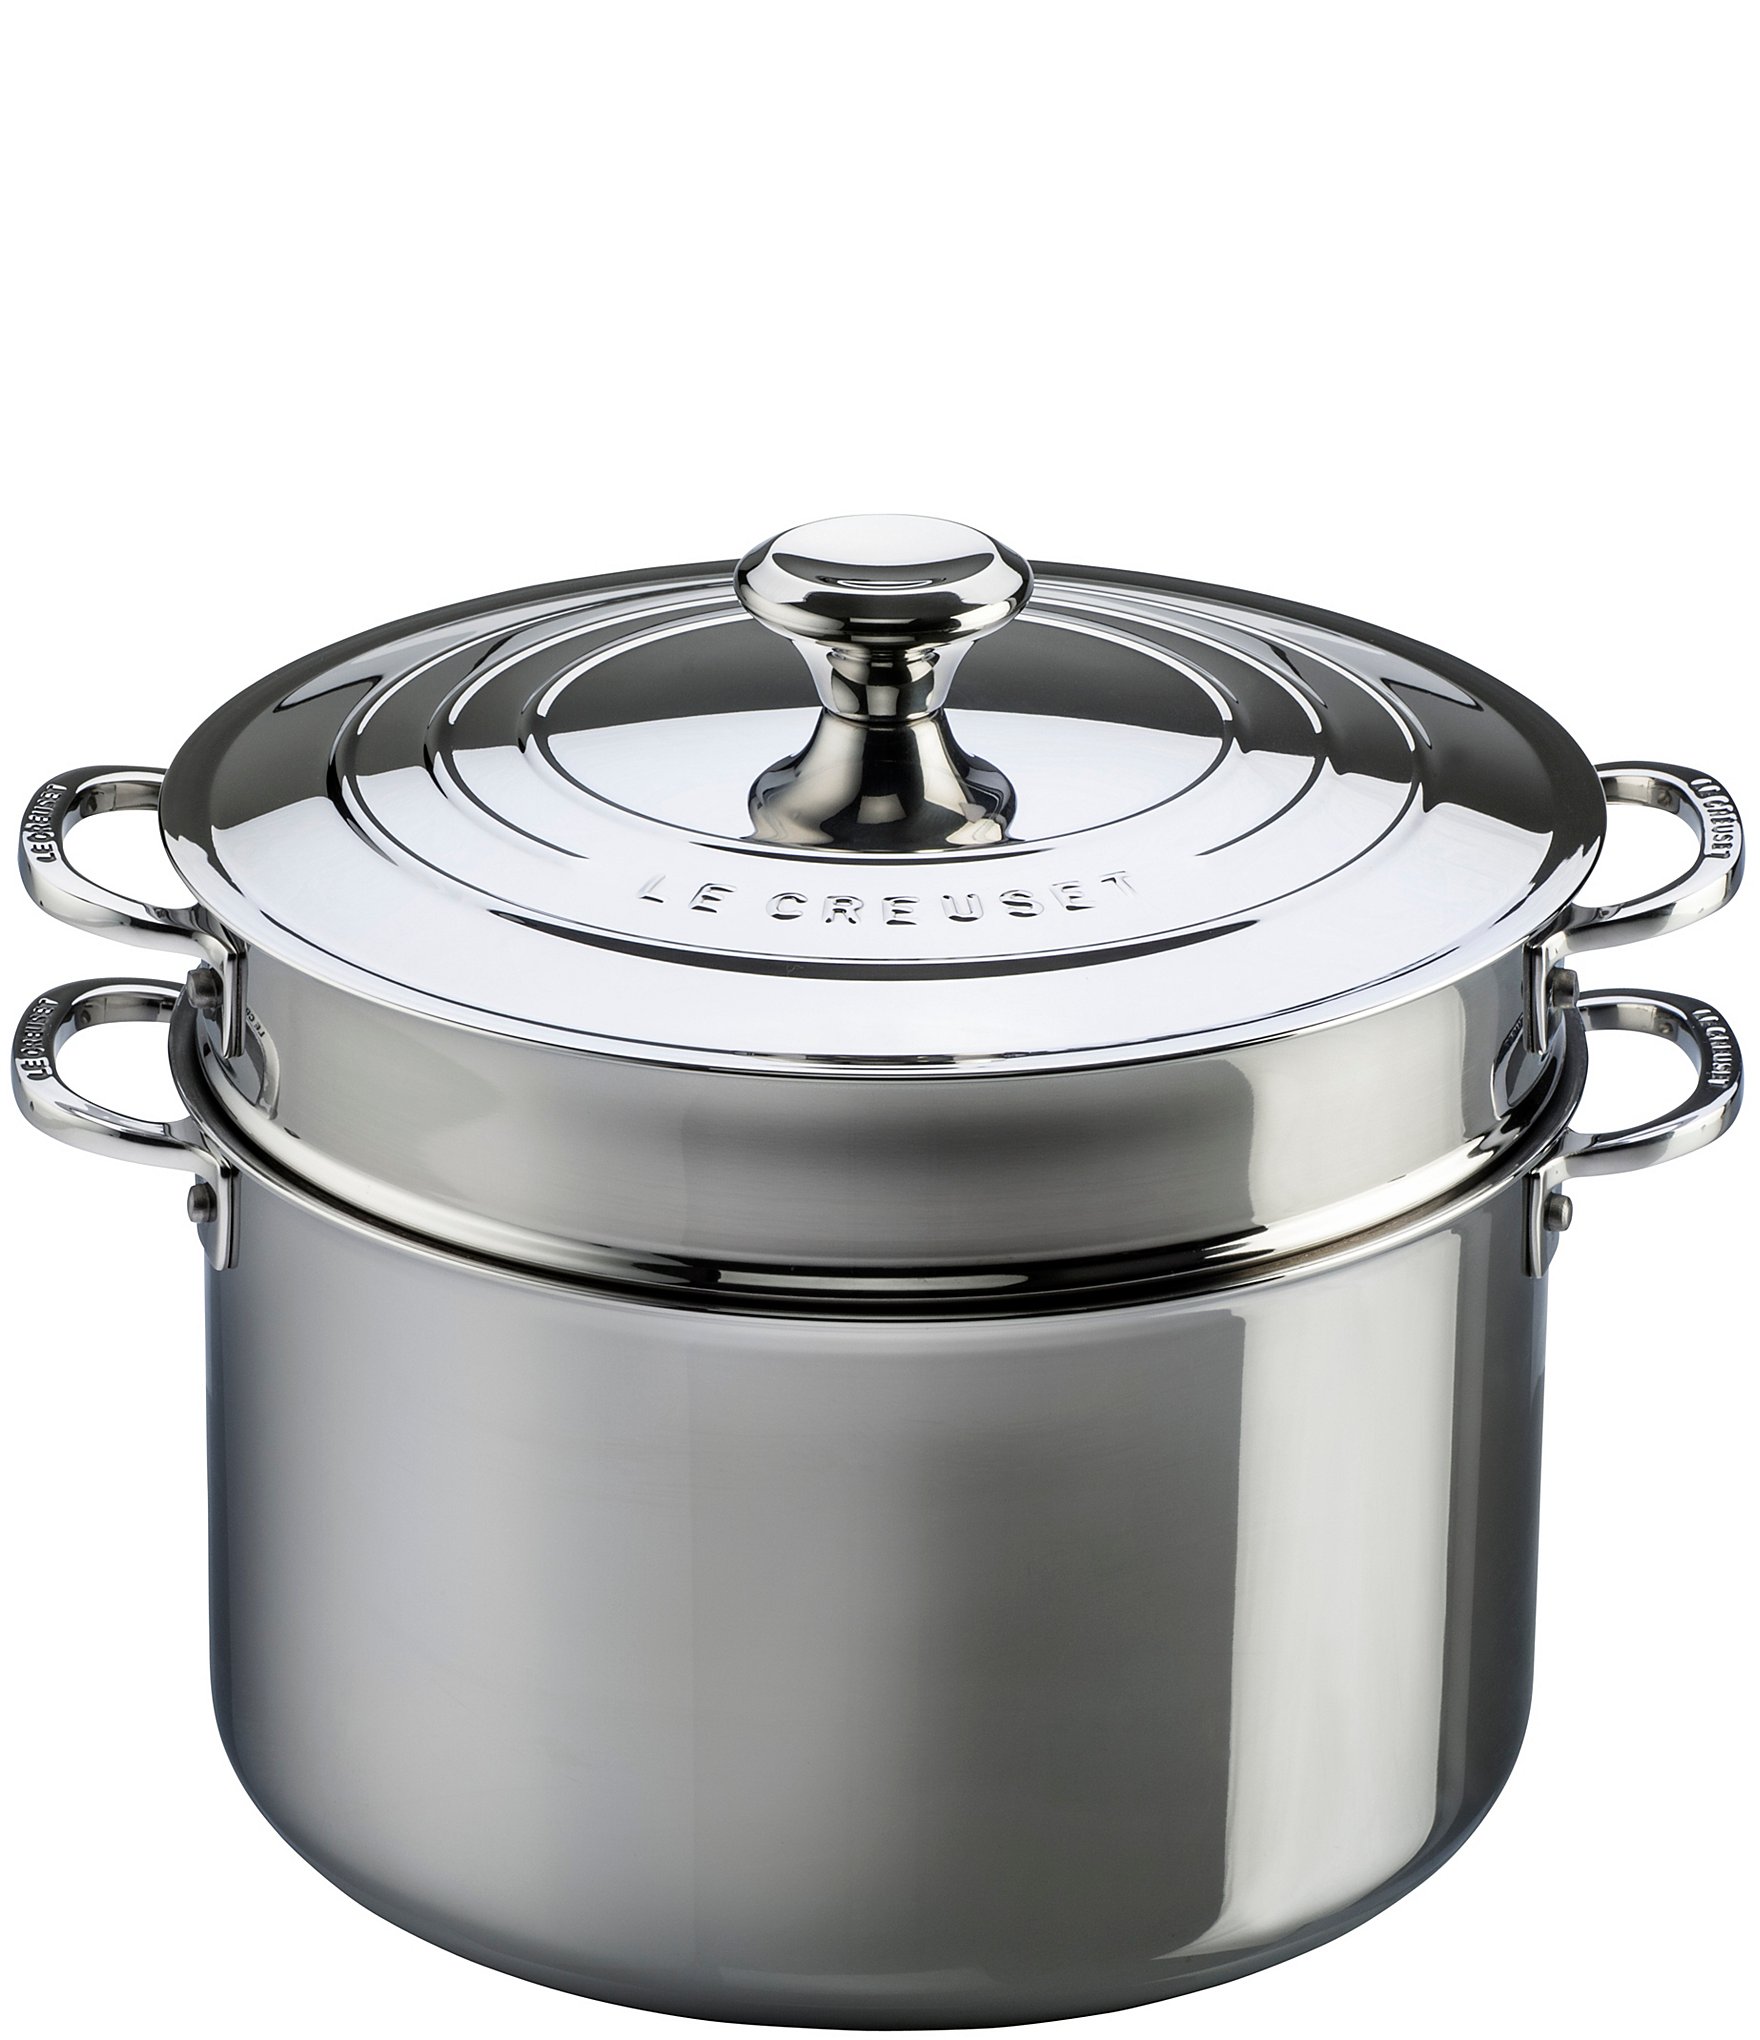 https://dimg.dillards.com/is/image/DillardsZoom/zoom/le-creuset-tri-ply-stainless-steel-9-quart-stockpot-with-lid-and-colander-insert/00000001_zi_stainless_steel05787999.jpg